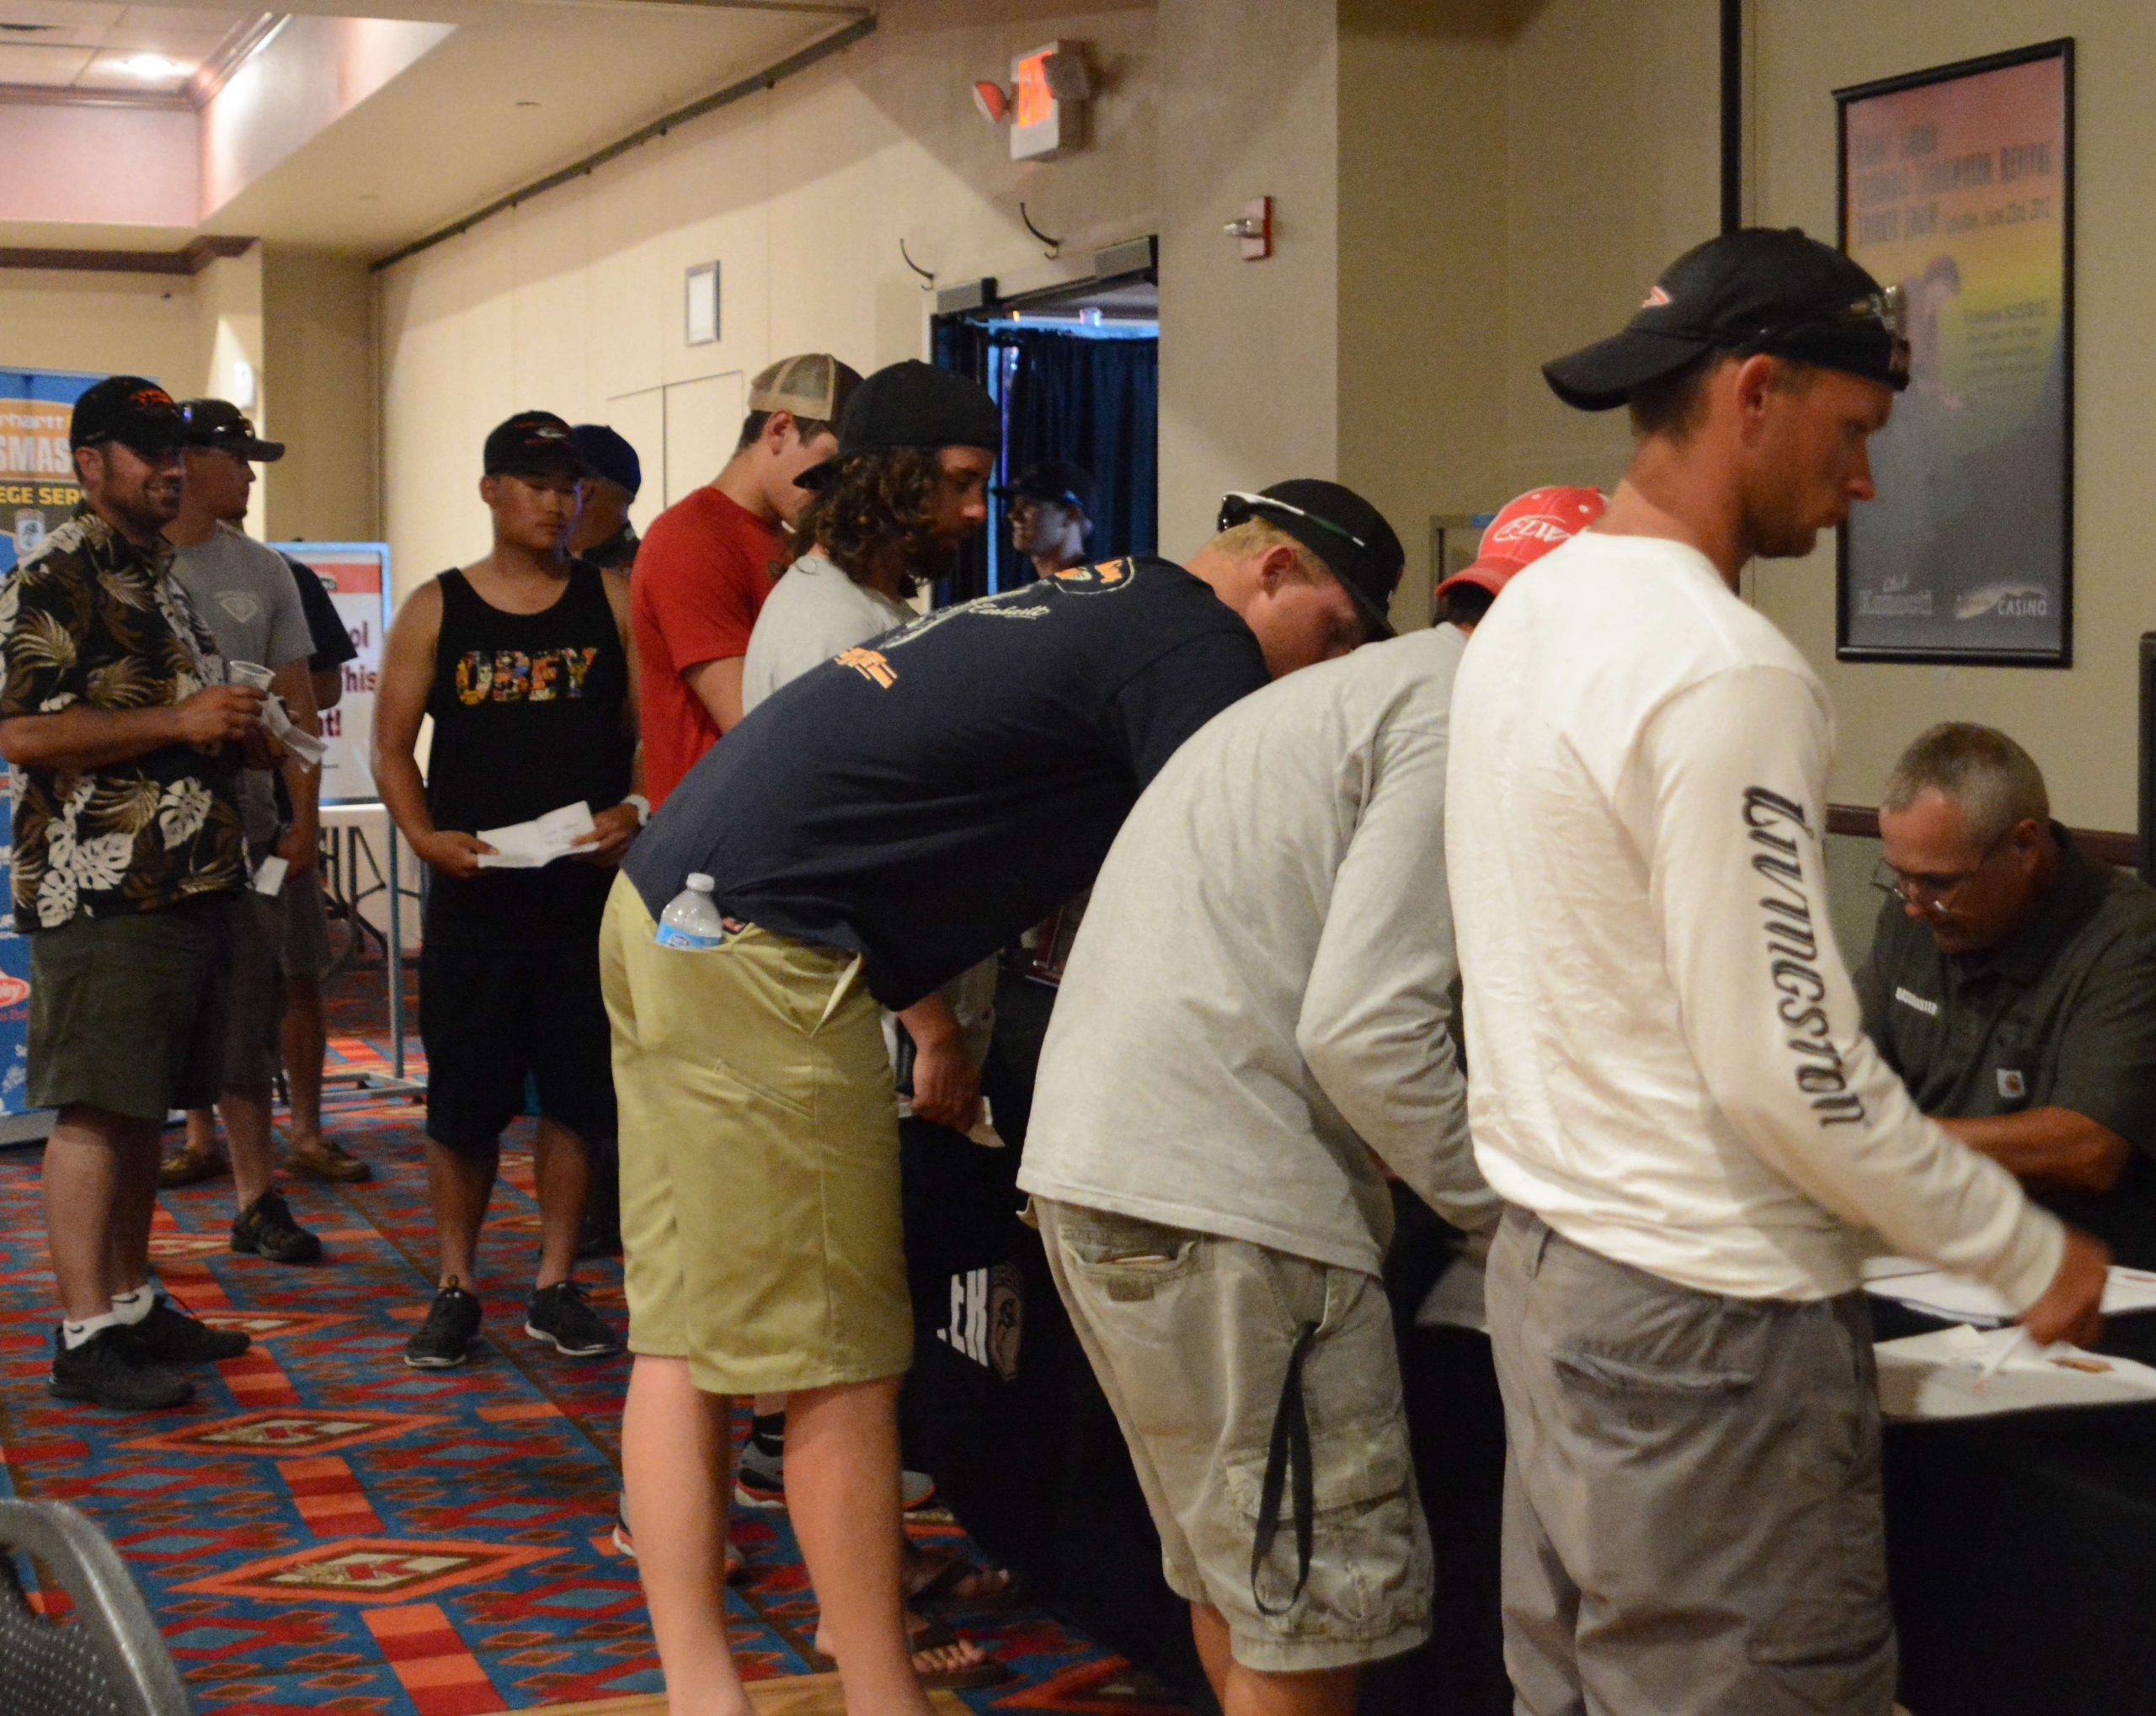 College anglers go through the registration line inside the banquet hall in the casino.